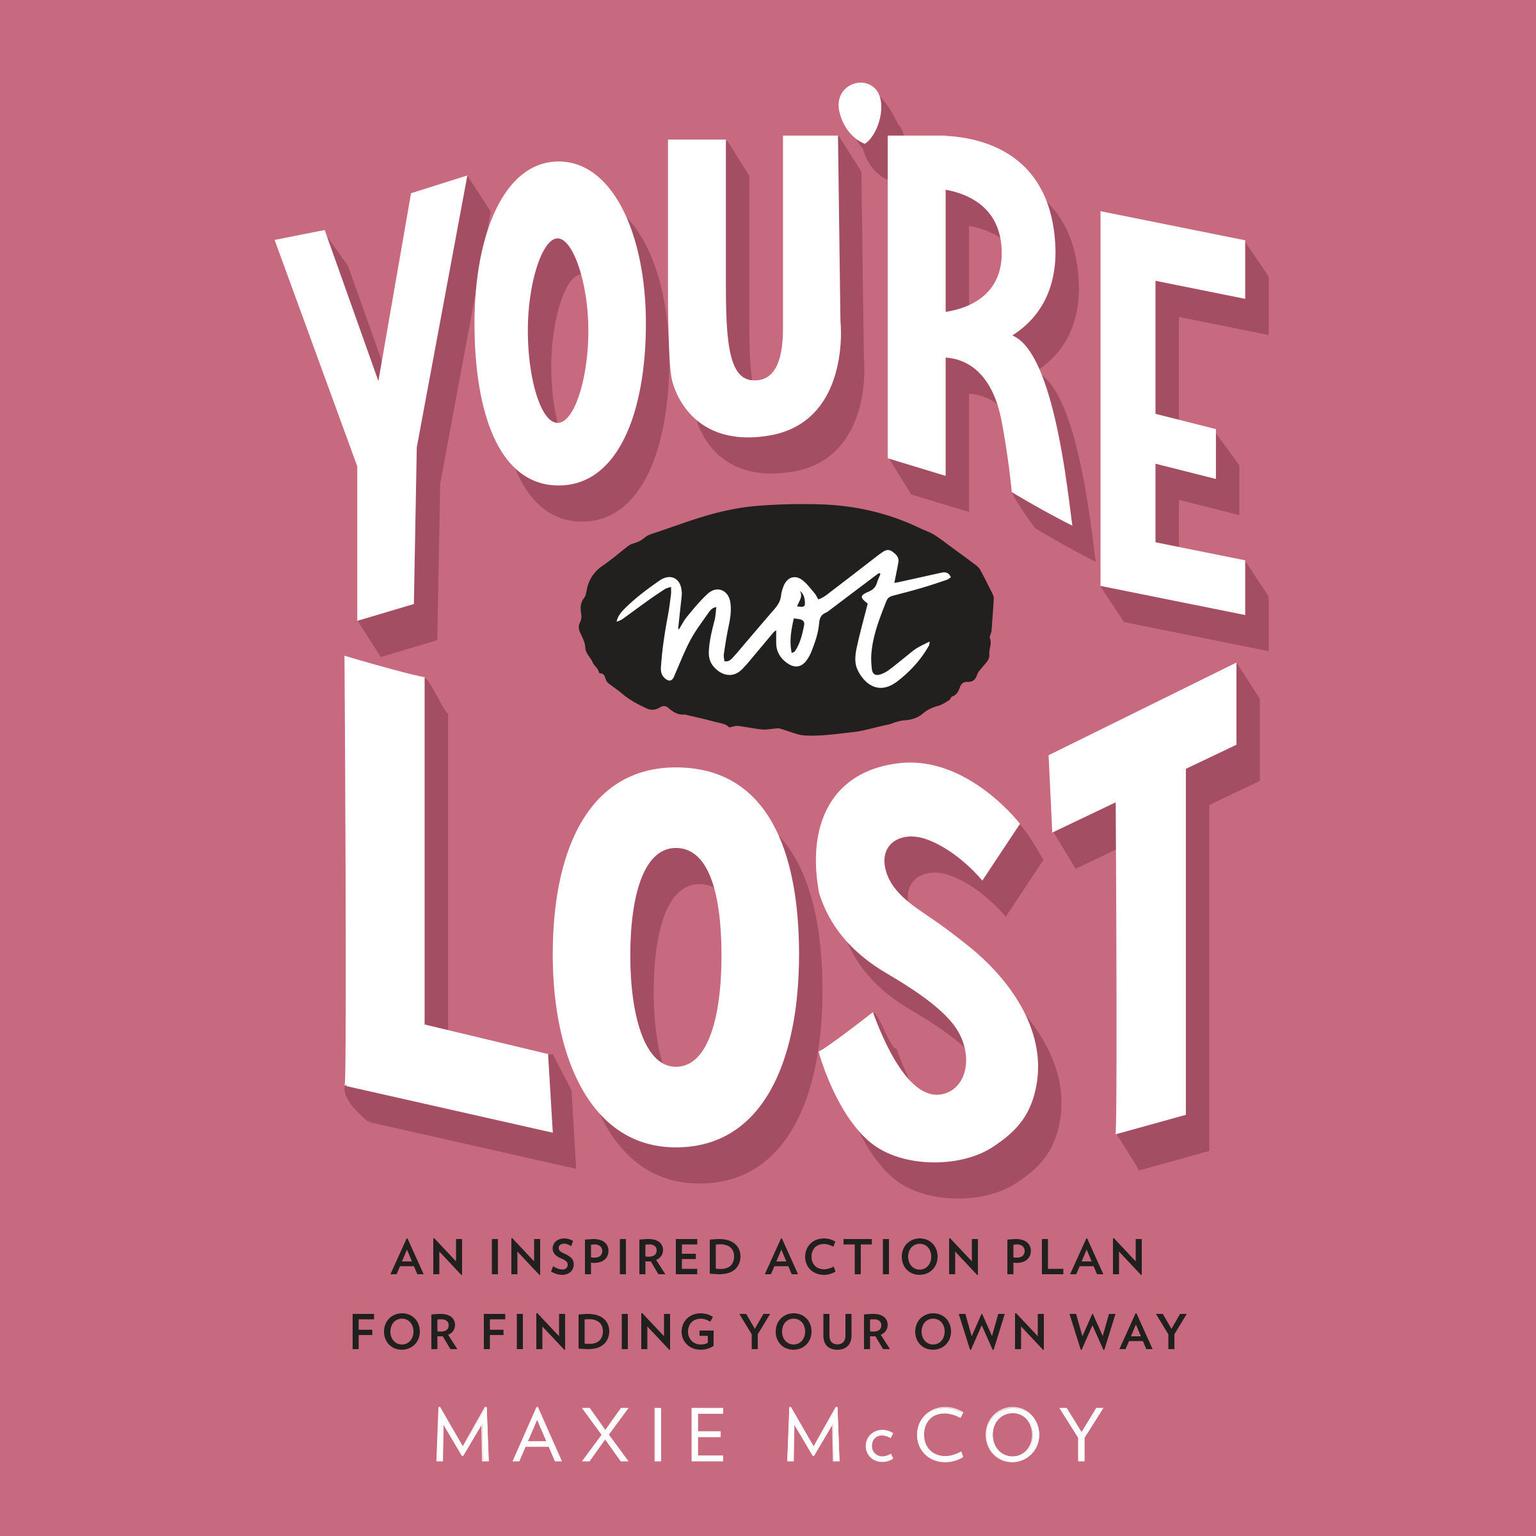 Youre Not Lost: An Inspired Action Plan for Finding Your Own Way Audiobook, by Maxie McCoy